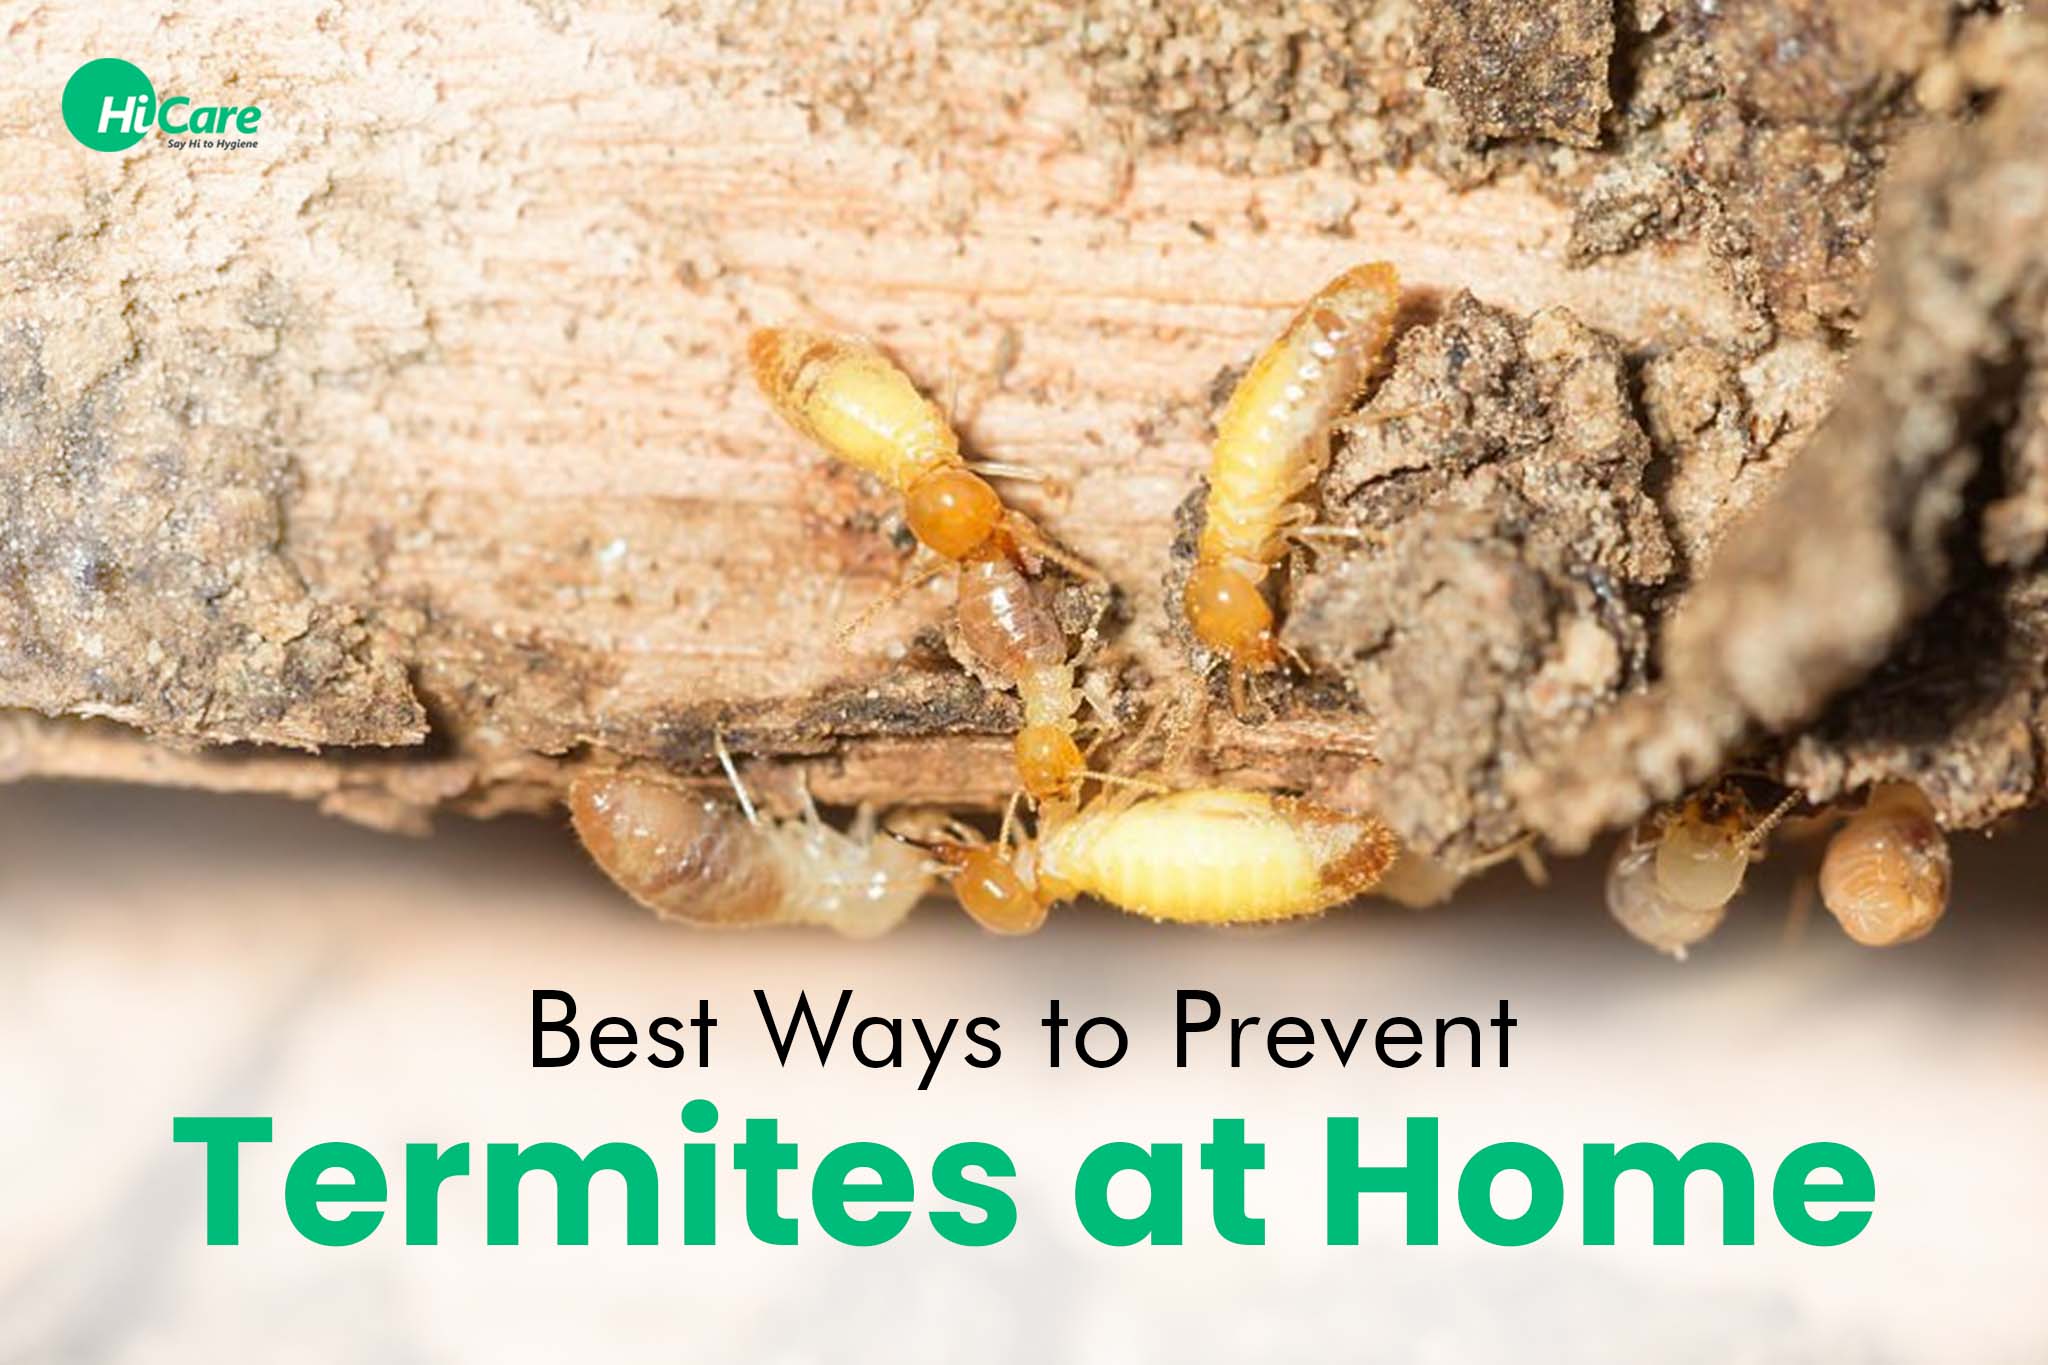 10 Best Ways to Prevent Termites at Home